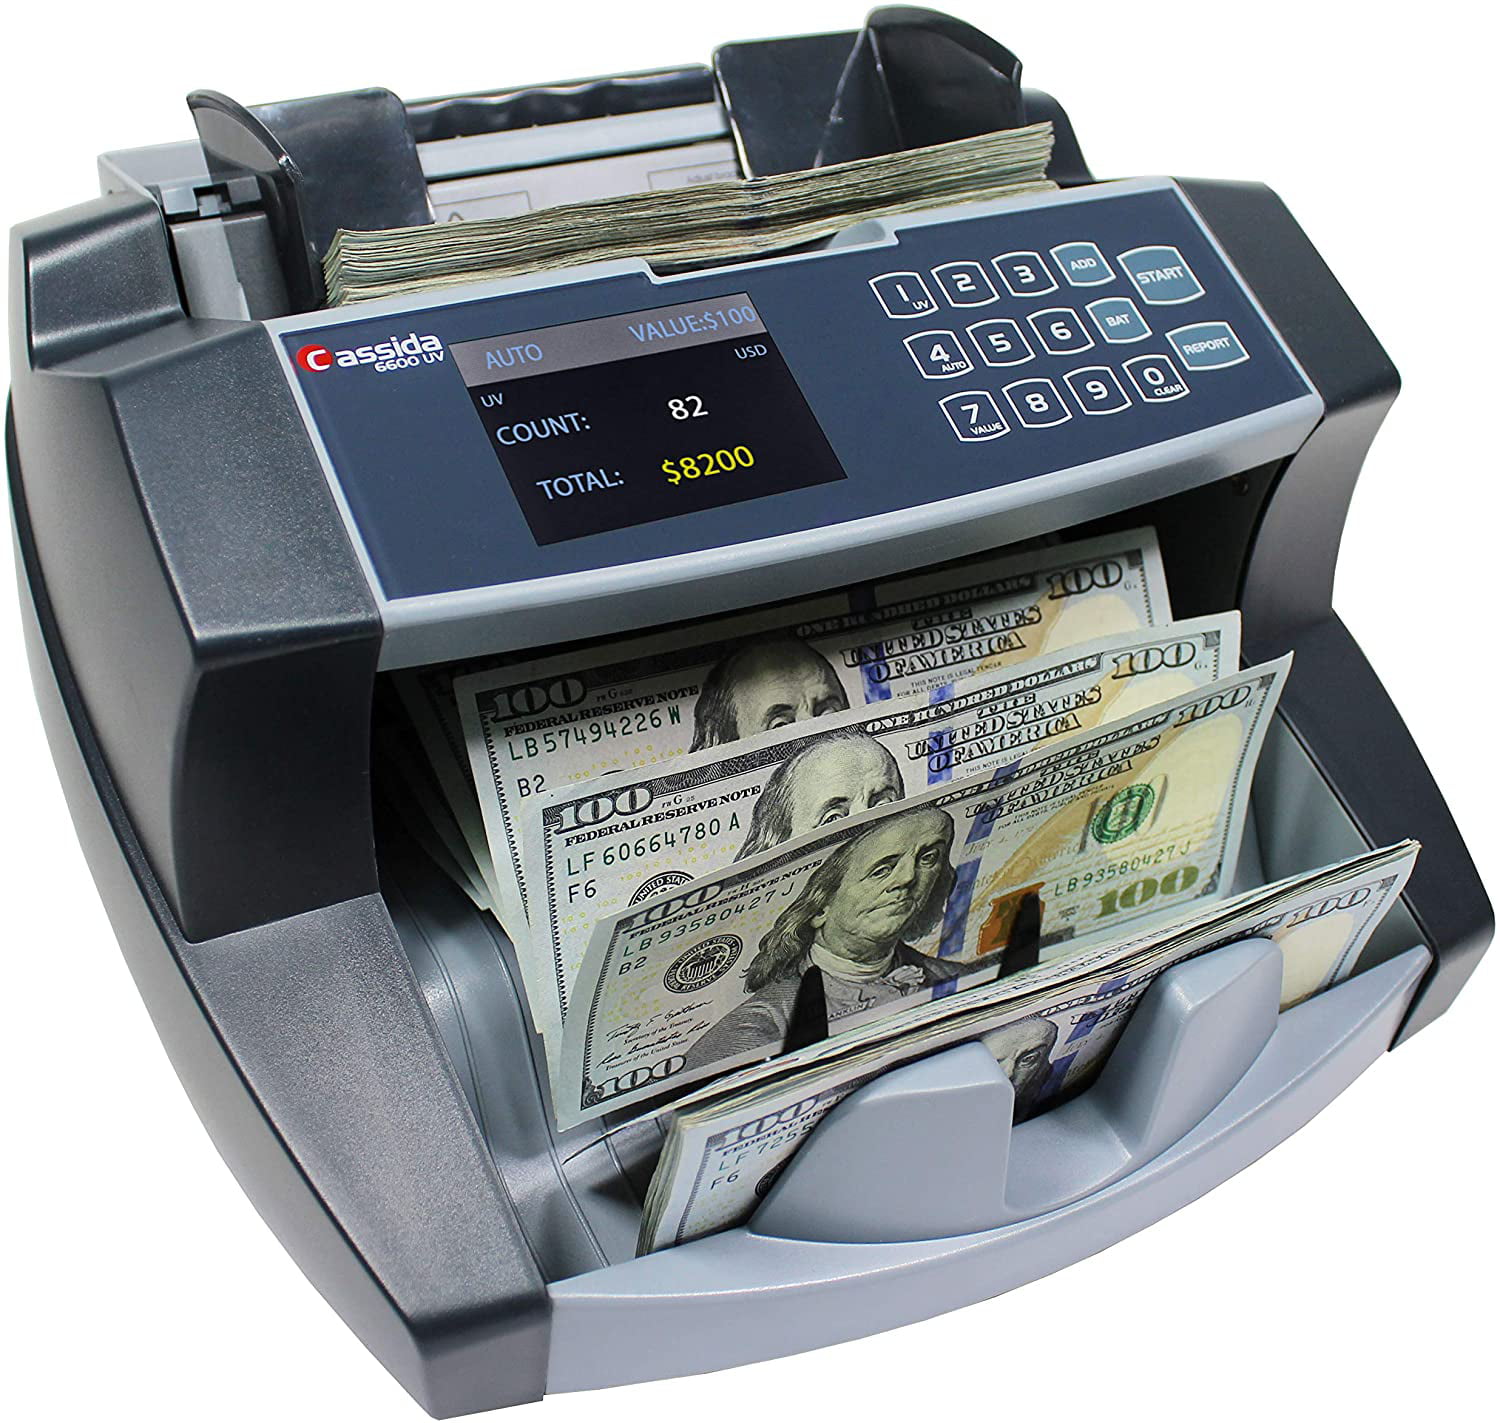 Bank Note Currency Counter Count Detector Money Fast Banknote Pound Cash Machine Black